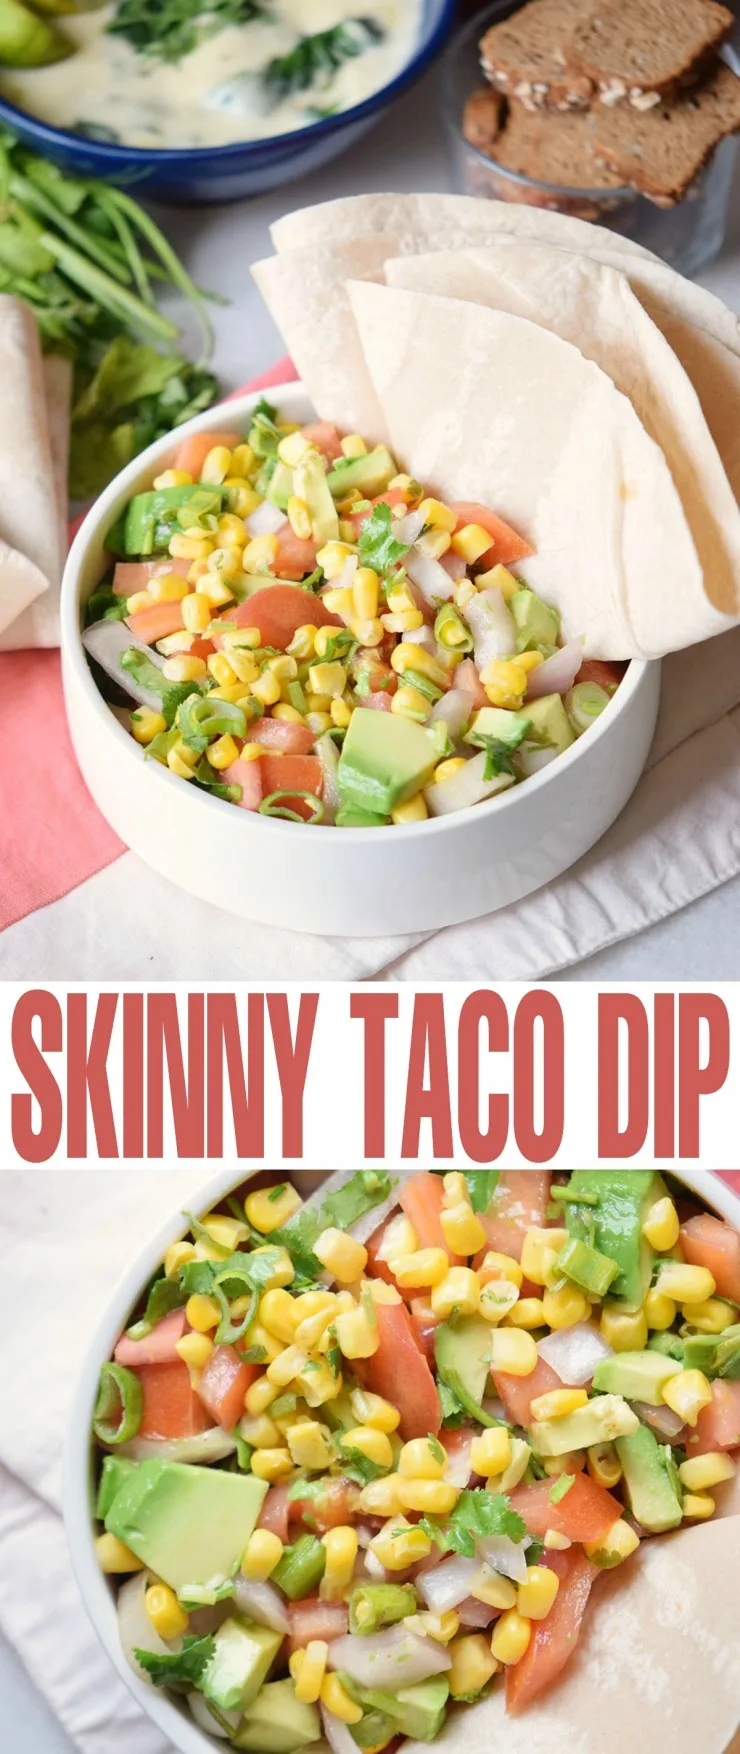  This taco dip is an incredibly fresh Mexican inspired appetizer. It is healthy and delicious - full of fabulous flavours and perfect for serving at parties!